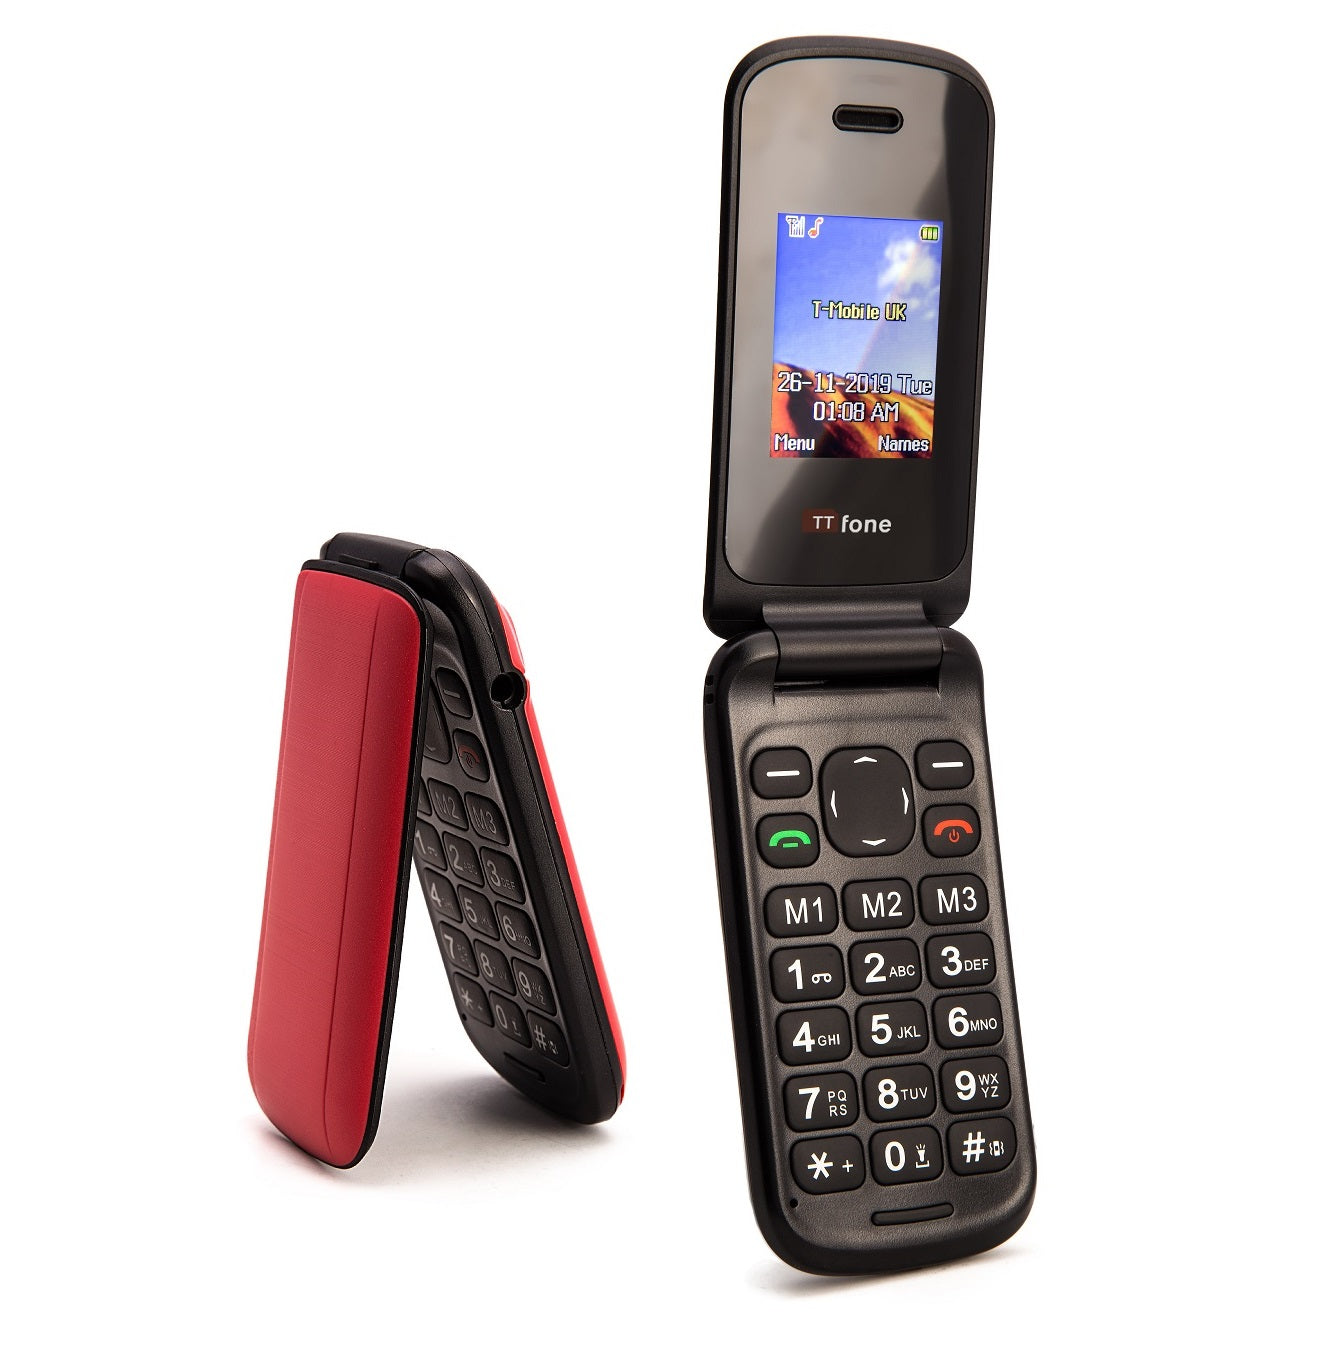 TTfone TT140 Red - Warehouse Deals Flip Folding Phone with Mains Charger, O2 Pay As You Go